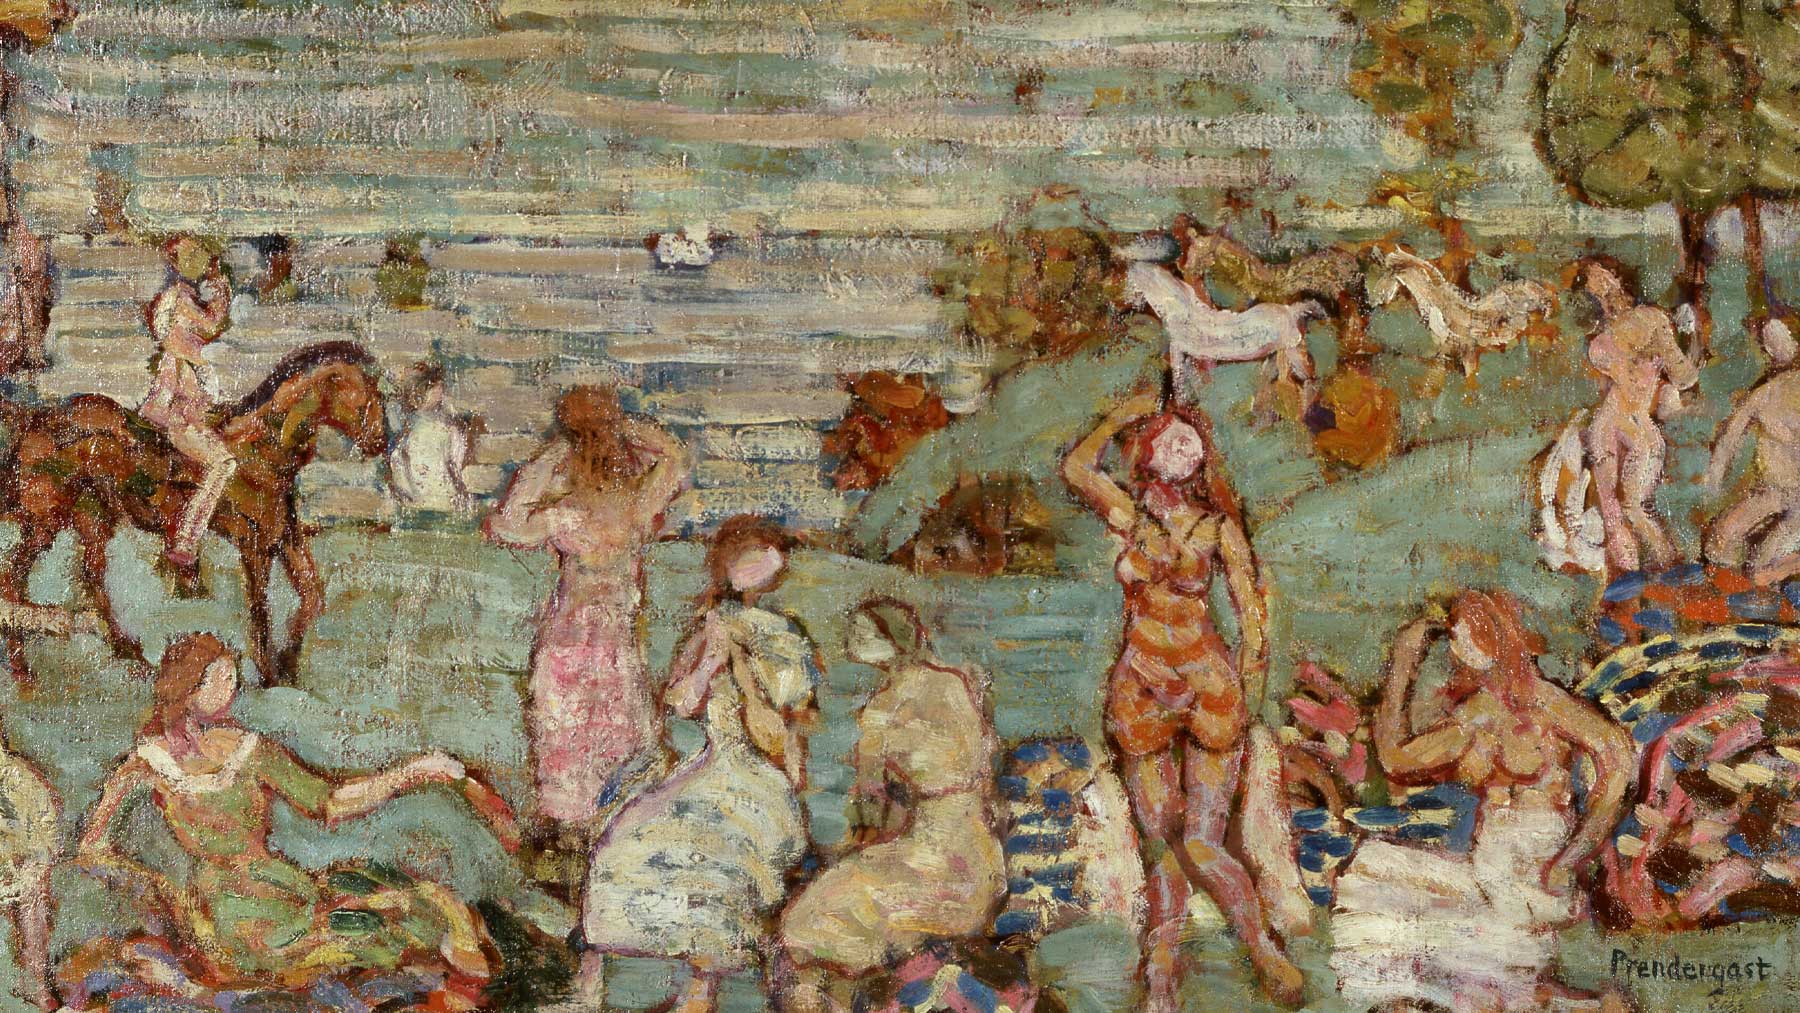 Maurice Brazil Prendergast, Picnic by the Sea